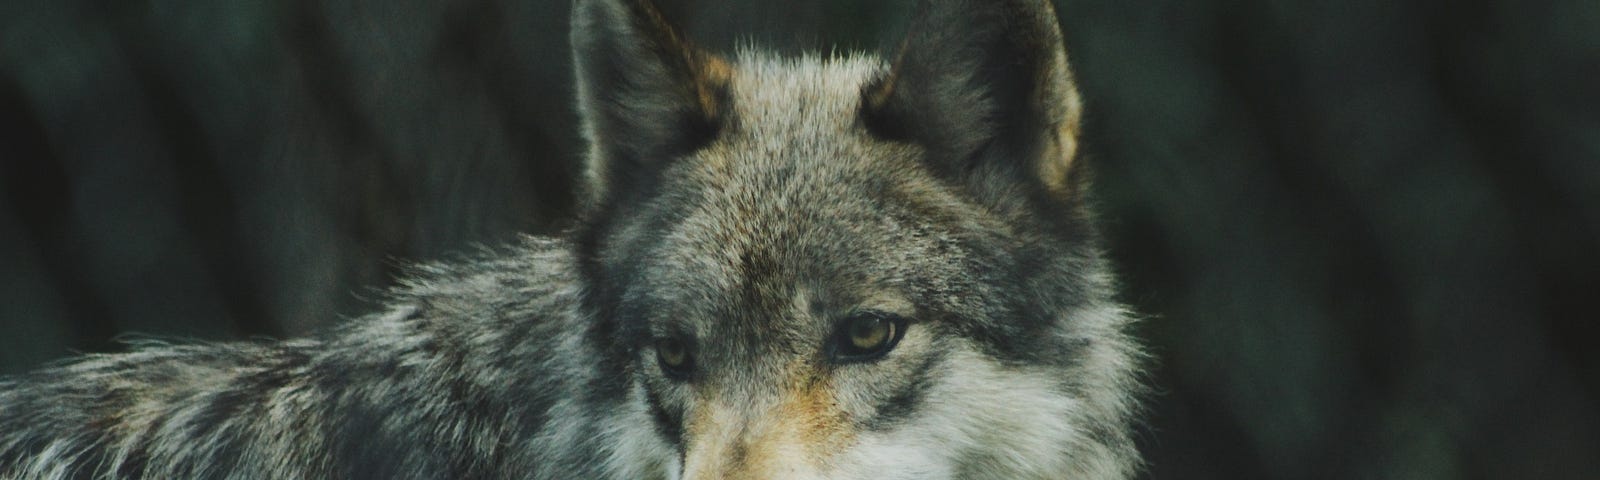 Image of a wolf alone in the woods.